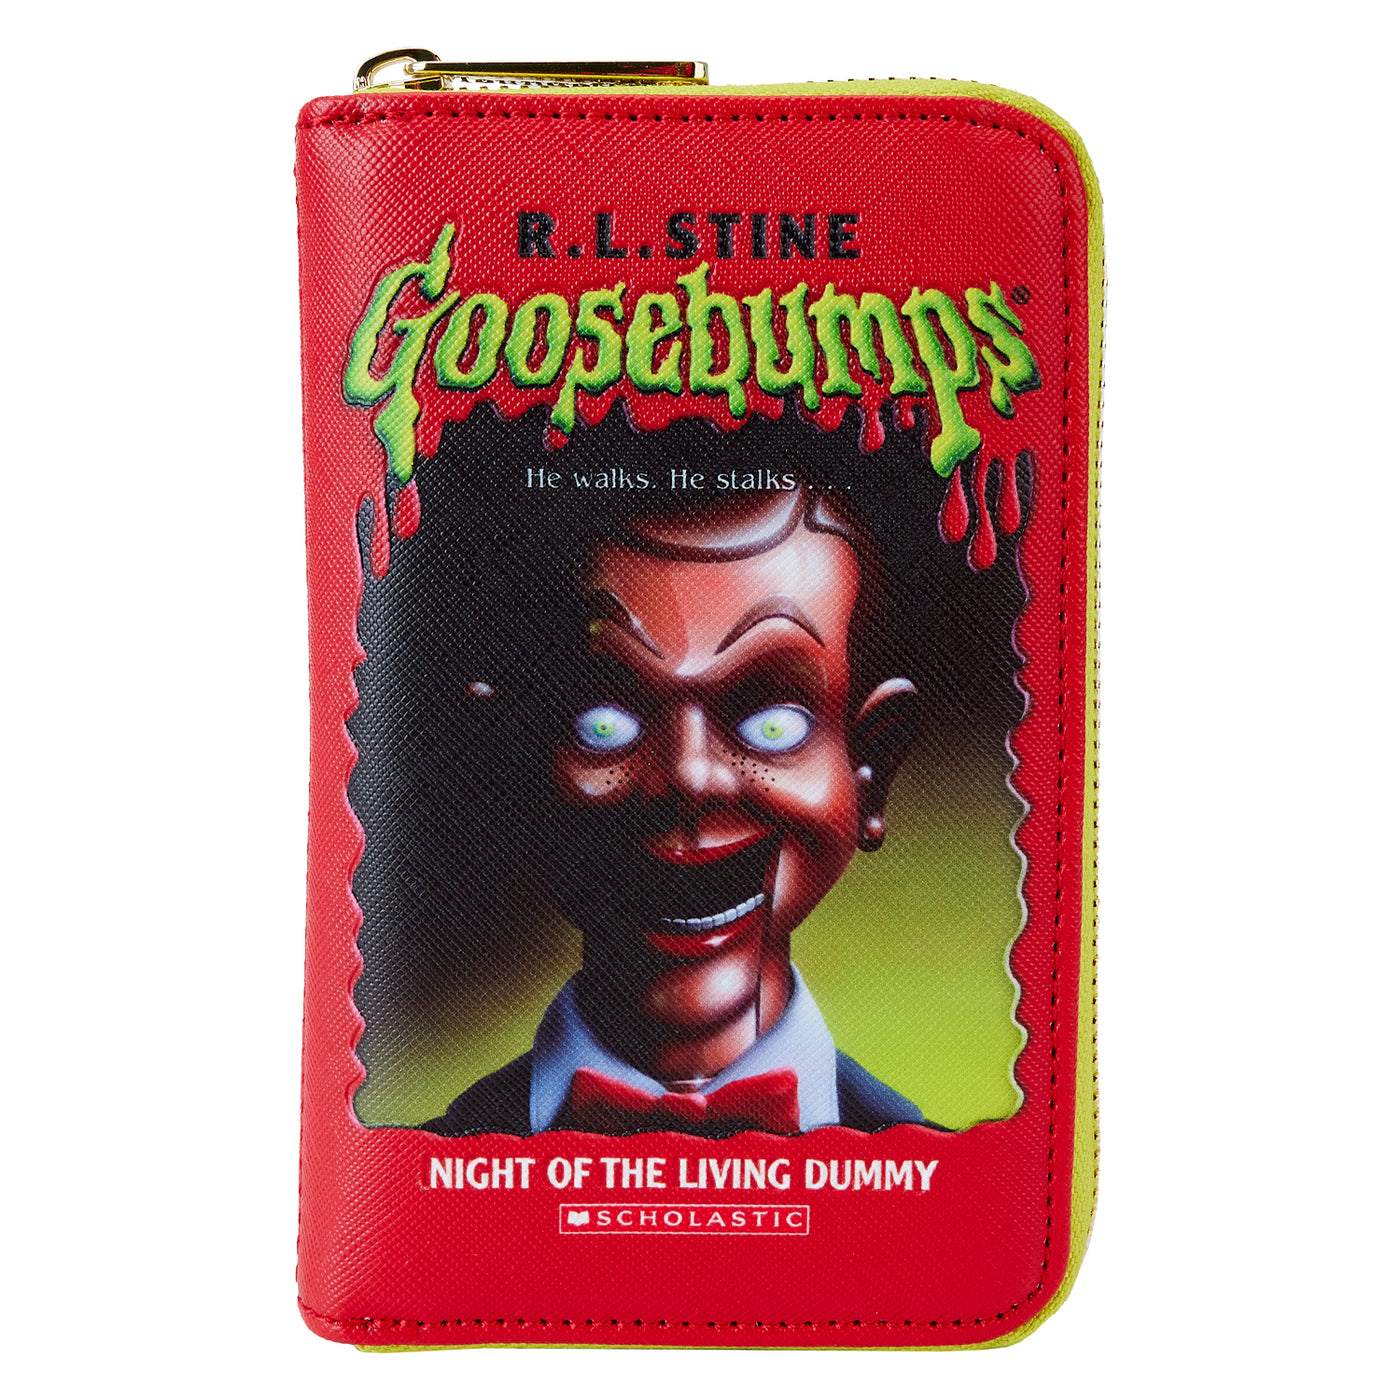 Sony Goosebumps Slappy Night of the Living Dummy Book Cover Wallet